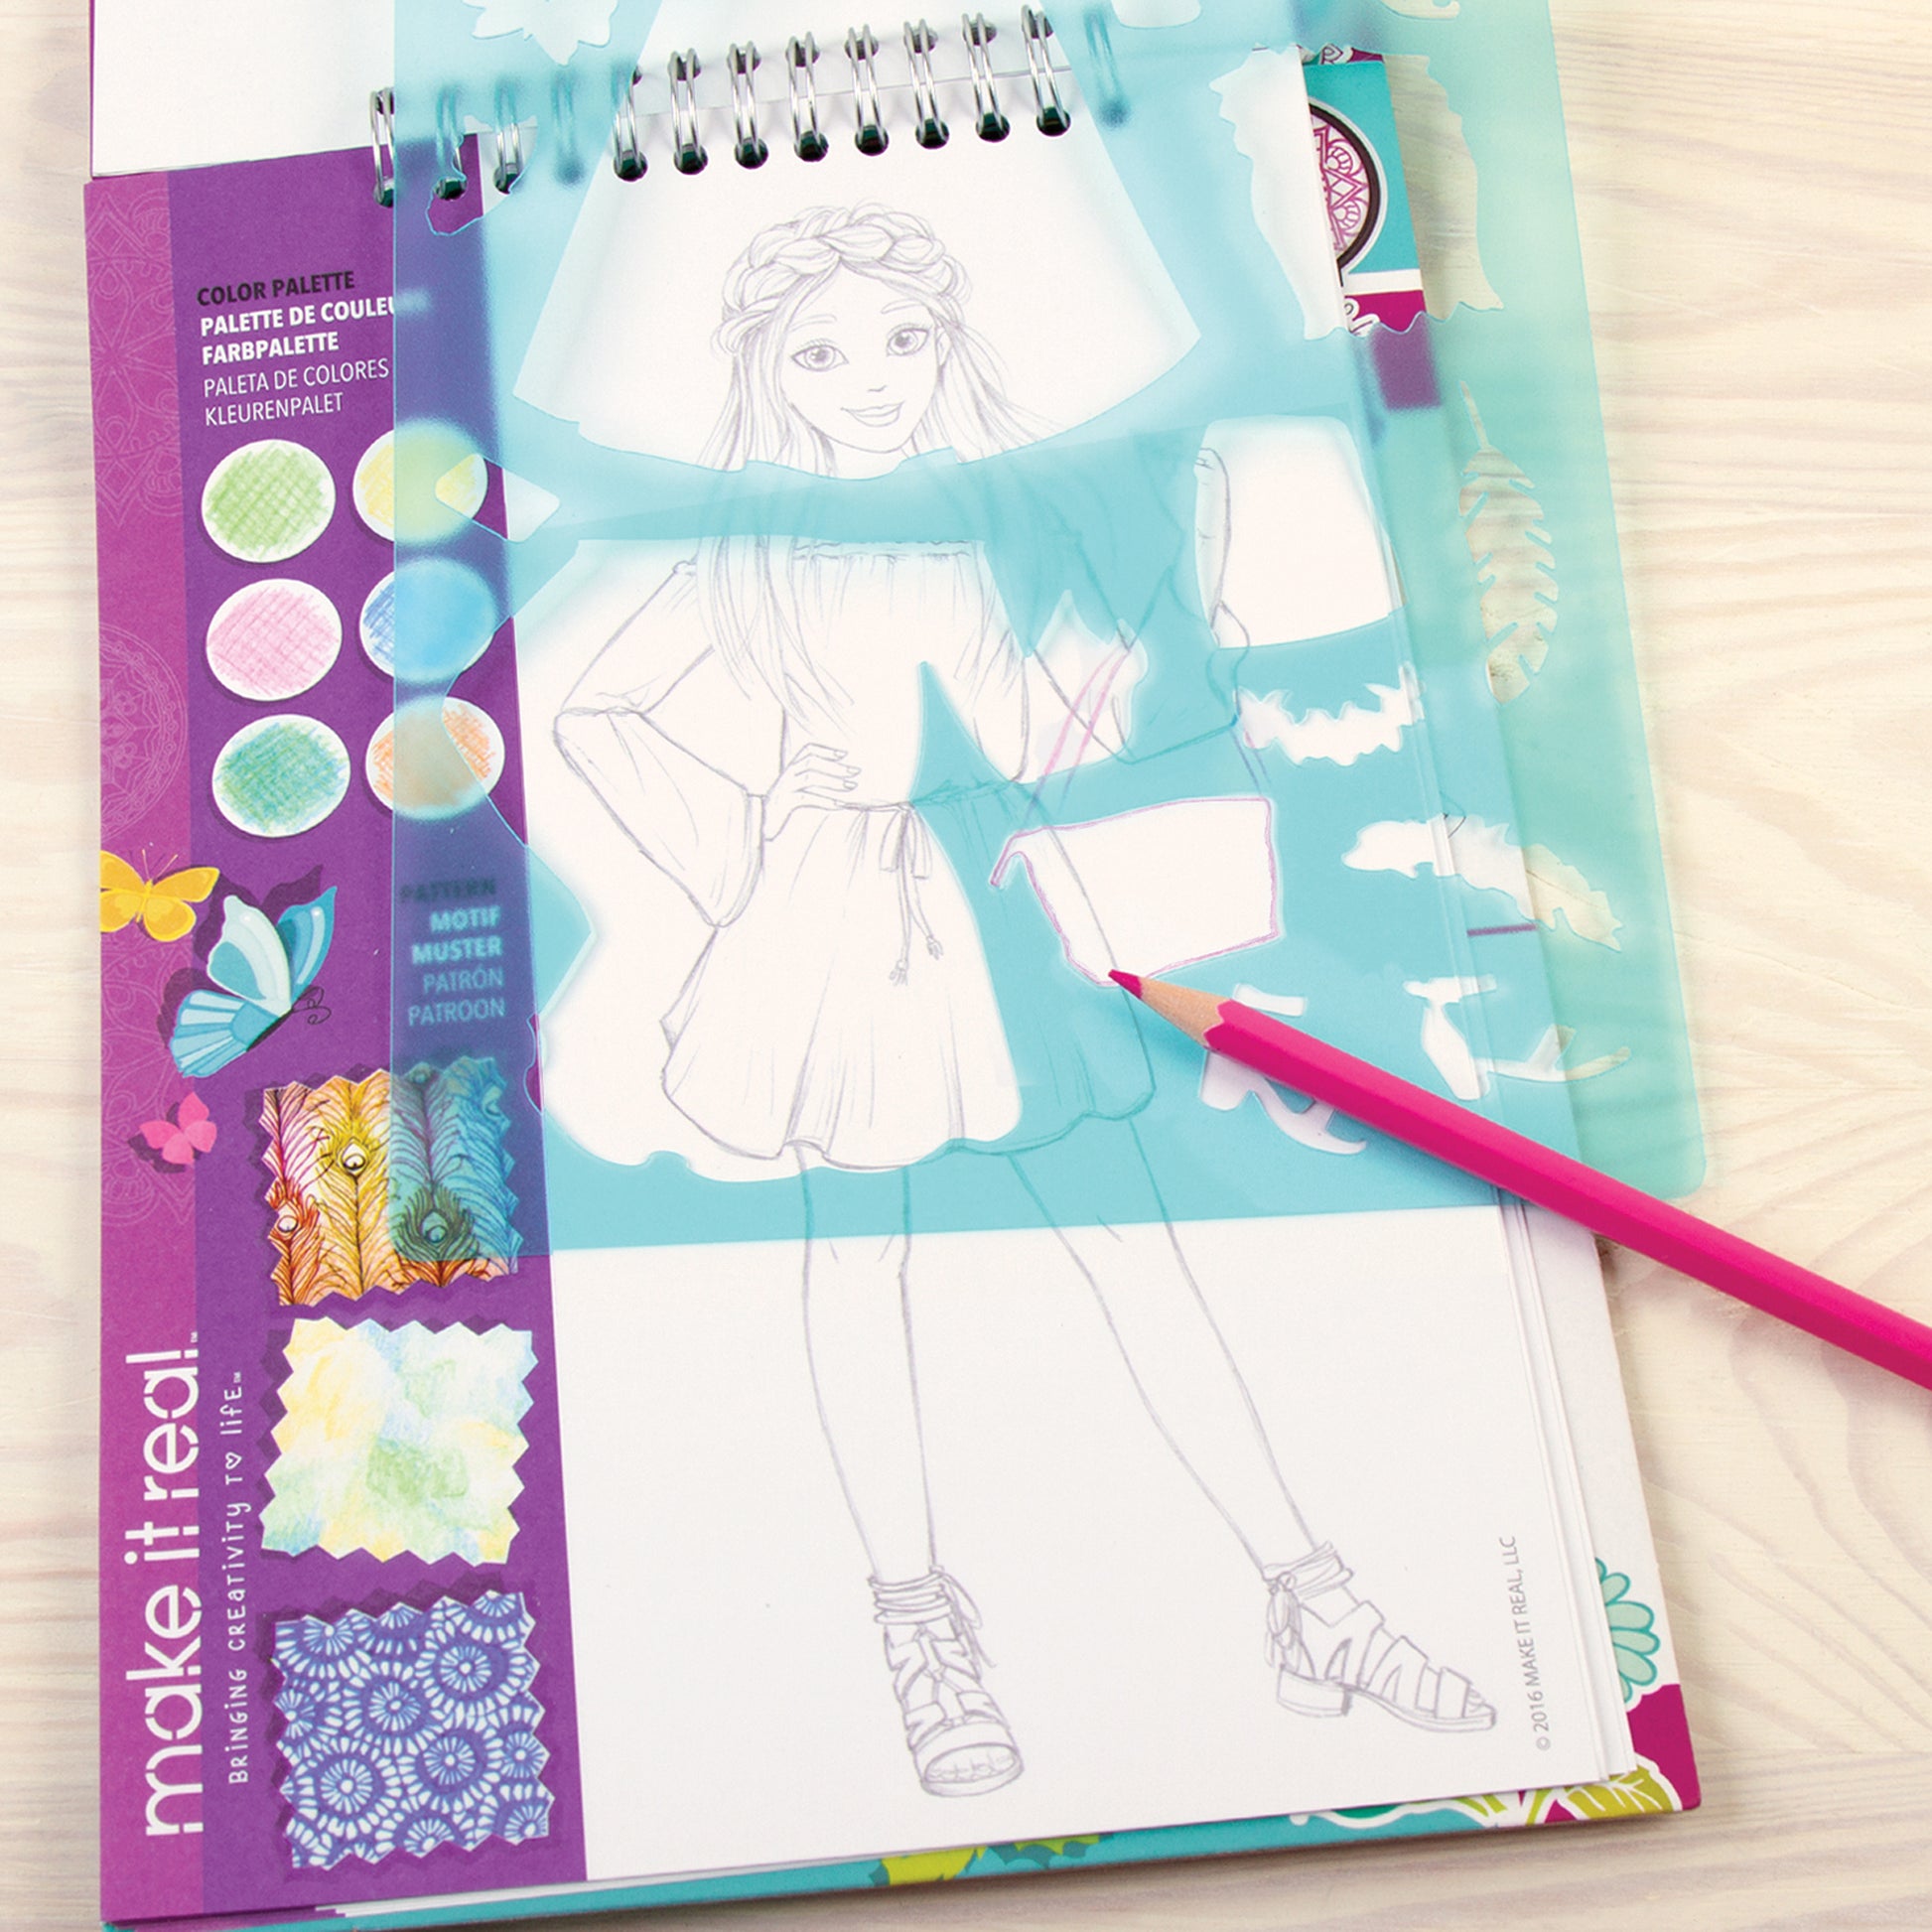 How to Make a Fashion Design Notebook: 13 Steps (with Pictures)